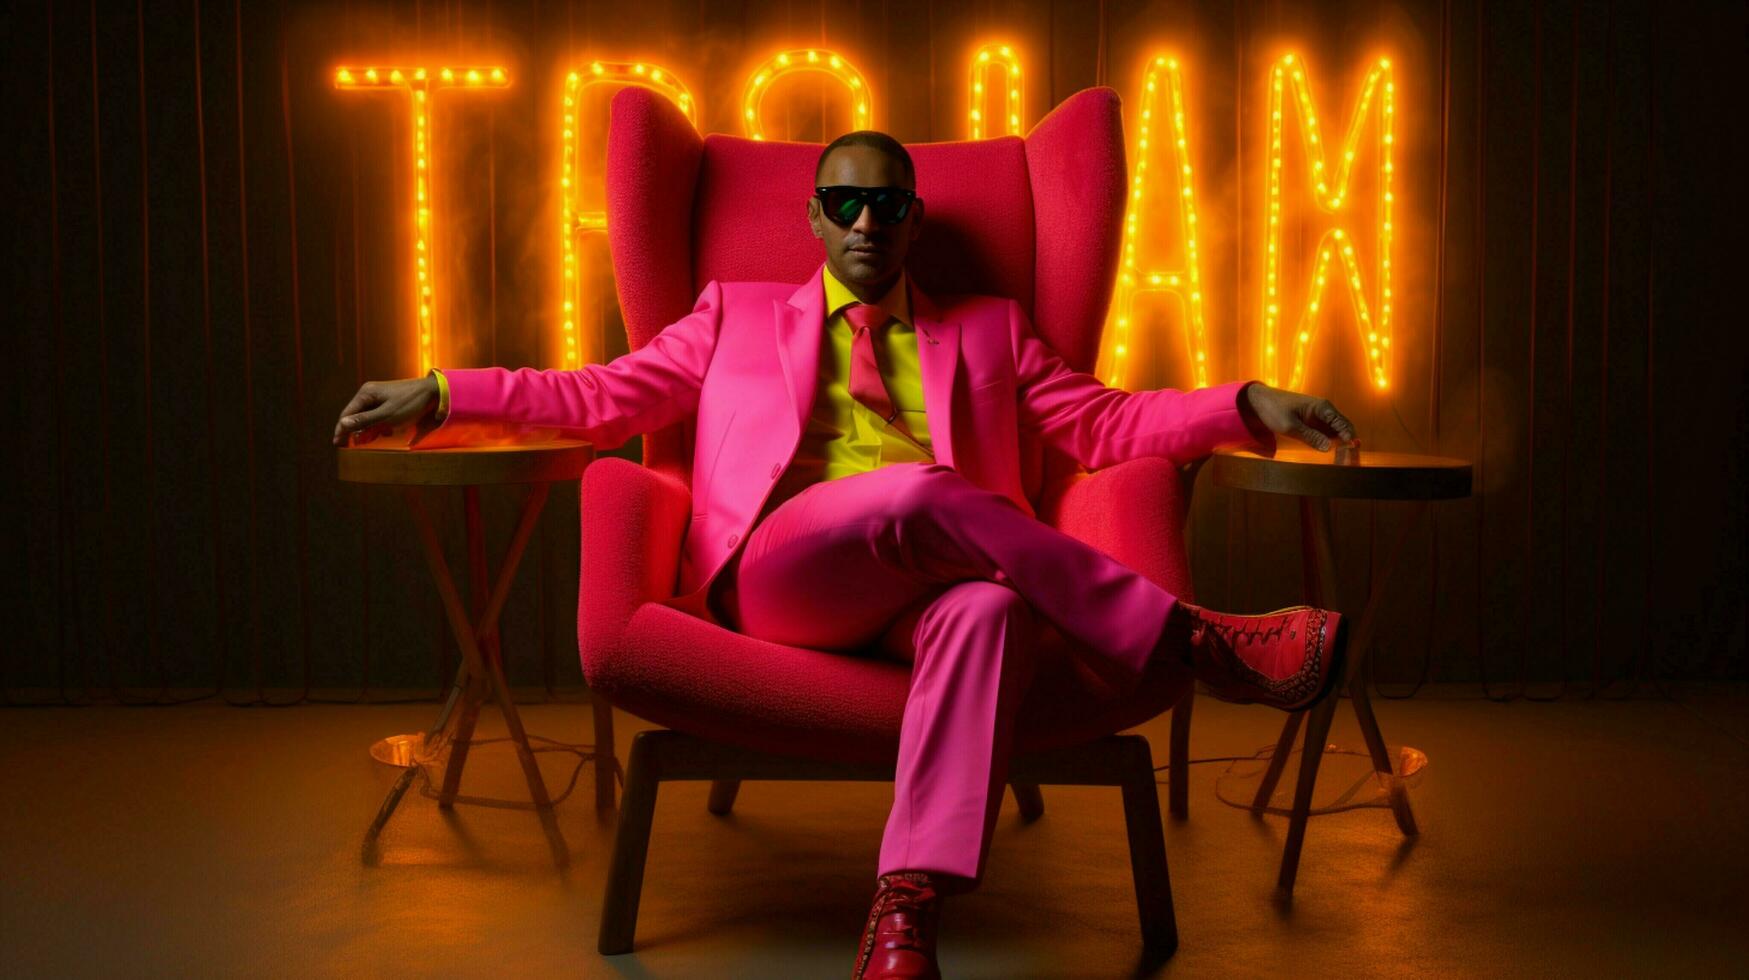 a man in a neon suit sits in a chair with a neon sign photo